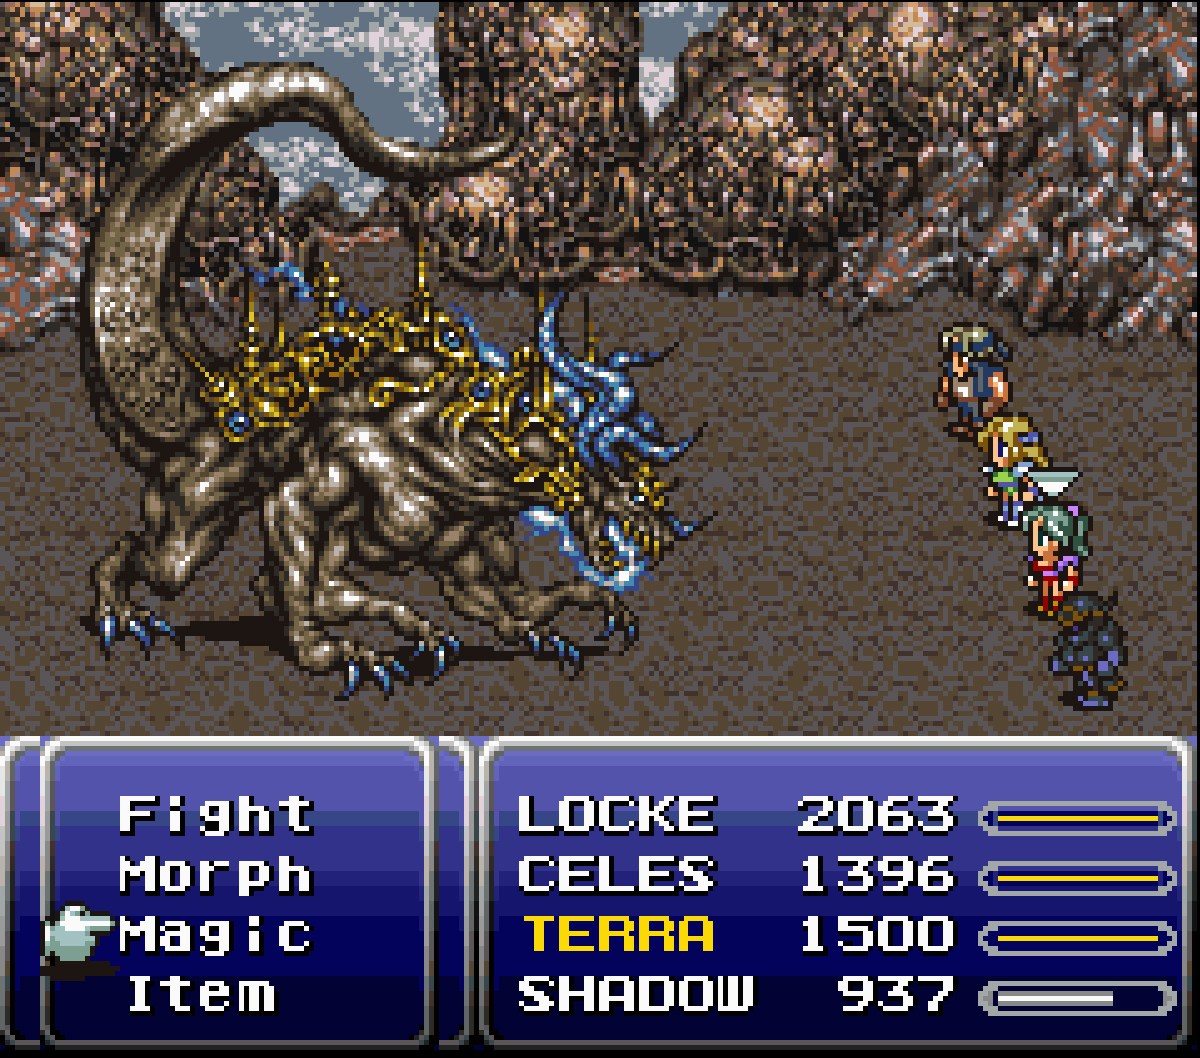 Final Fantasy 6 Remake should be the next game in the series